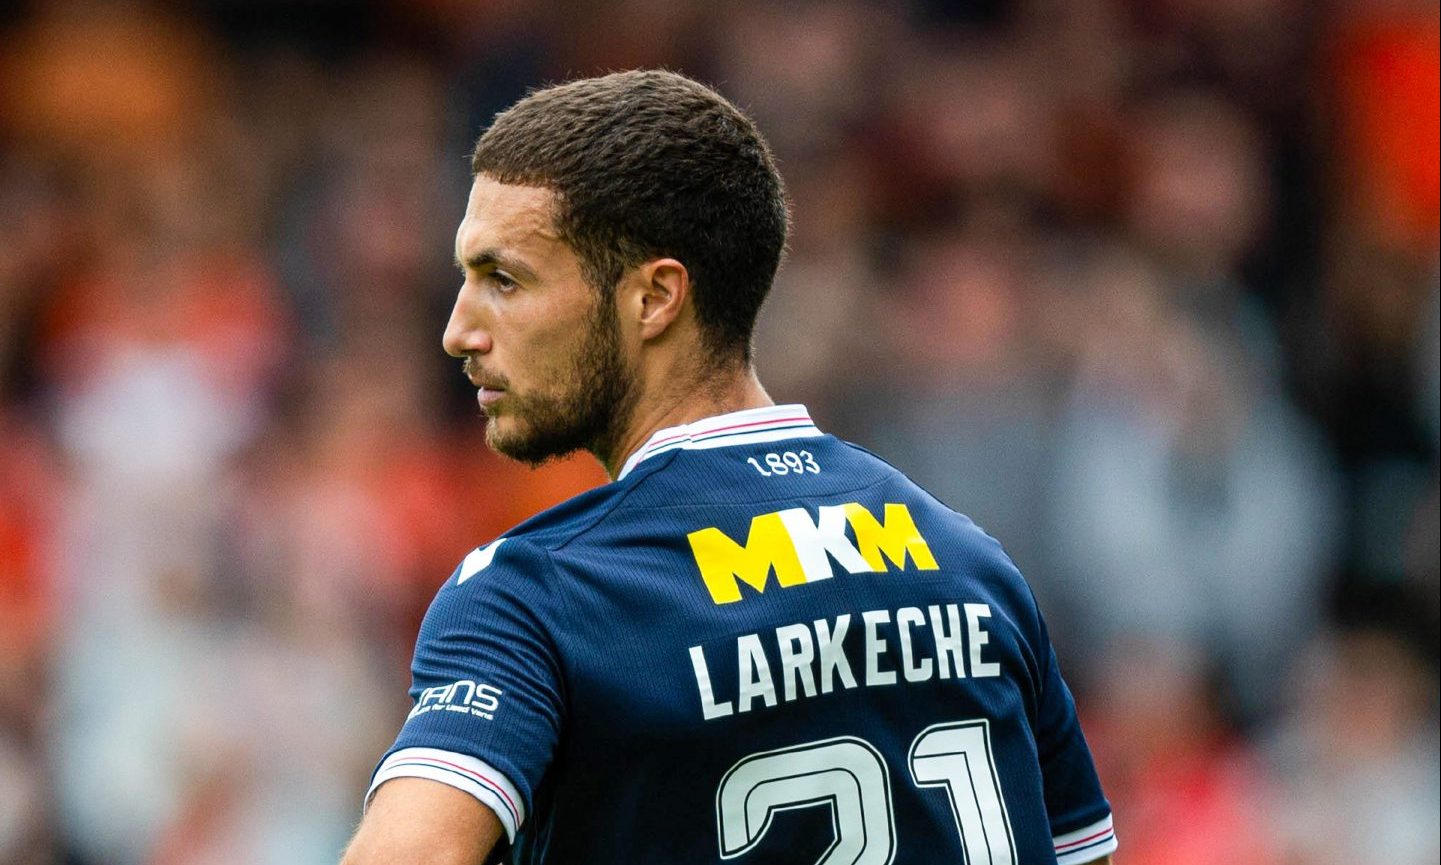 Ziyad Larkeche on Dundee debut in the derby. Image: SNS